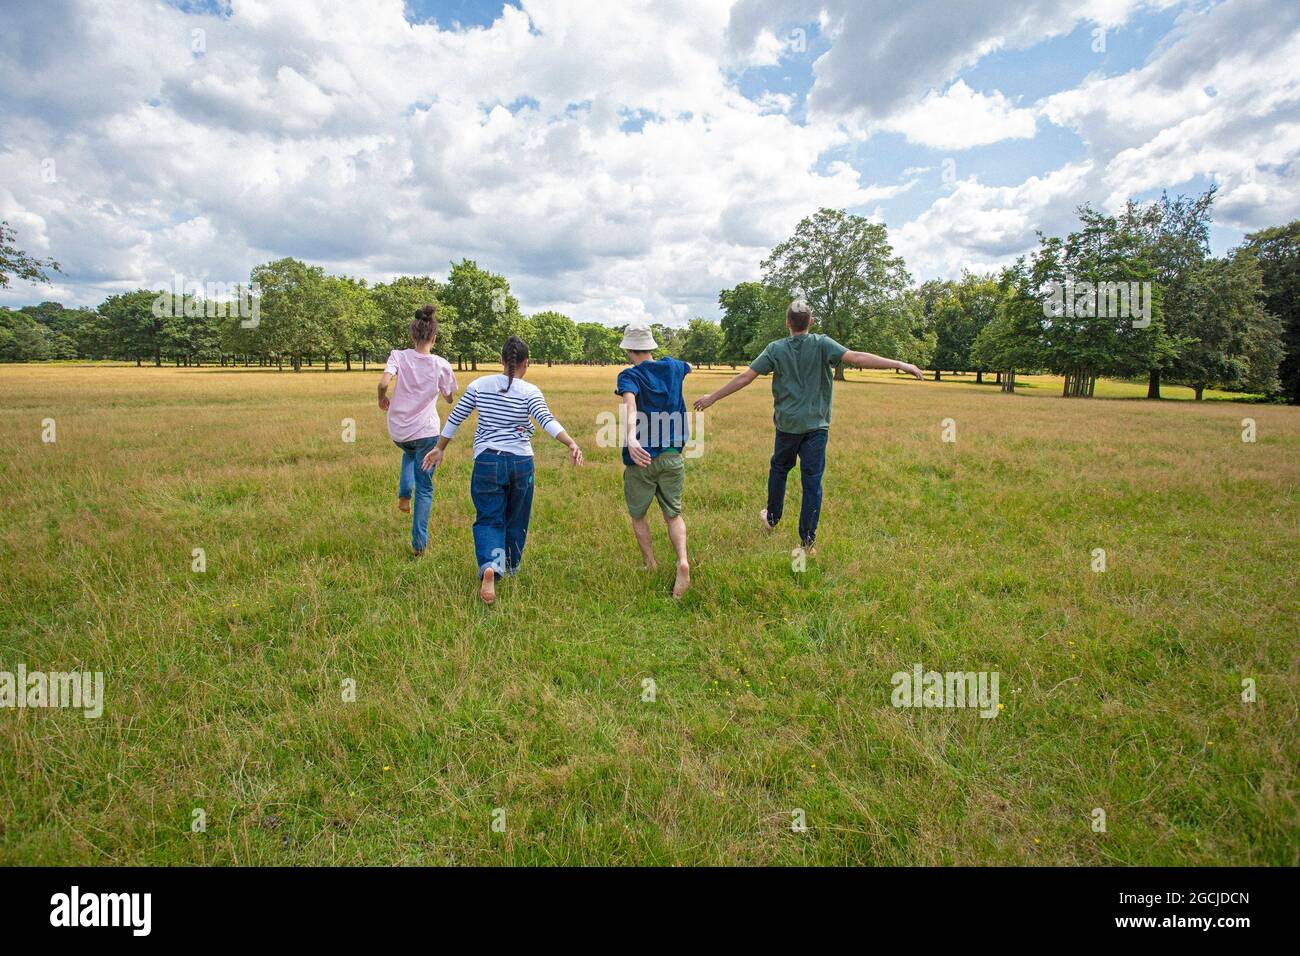 A group of young people are running in the park. Stock Photo